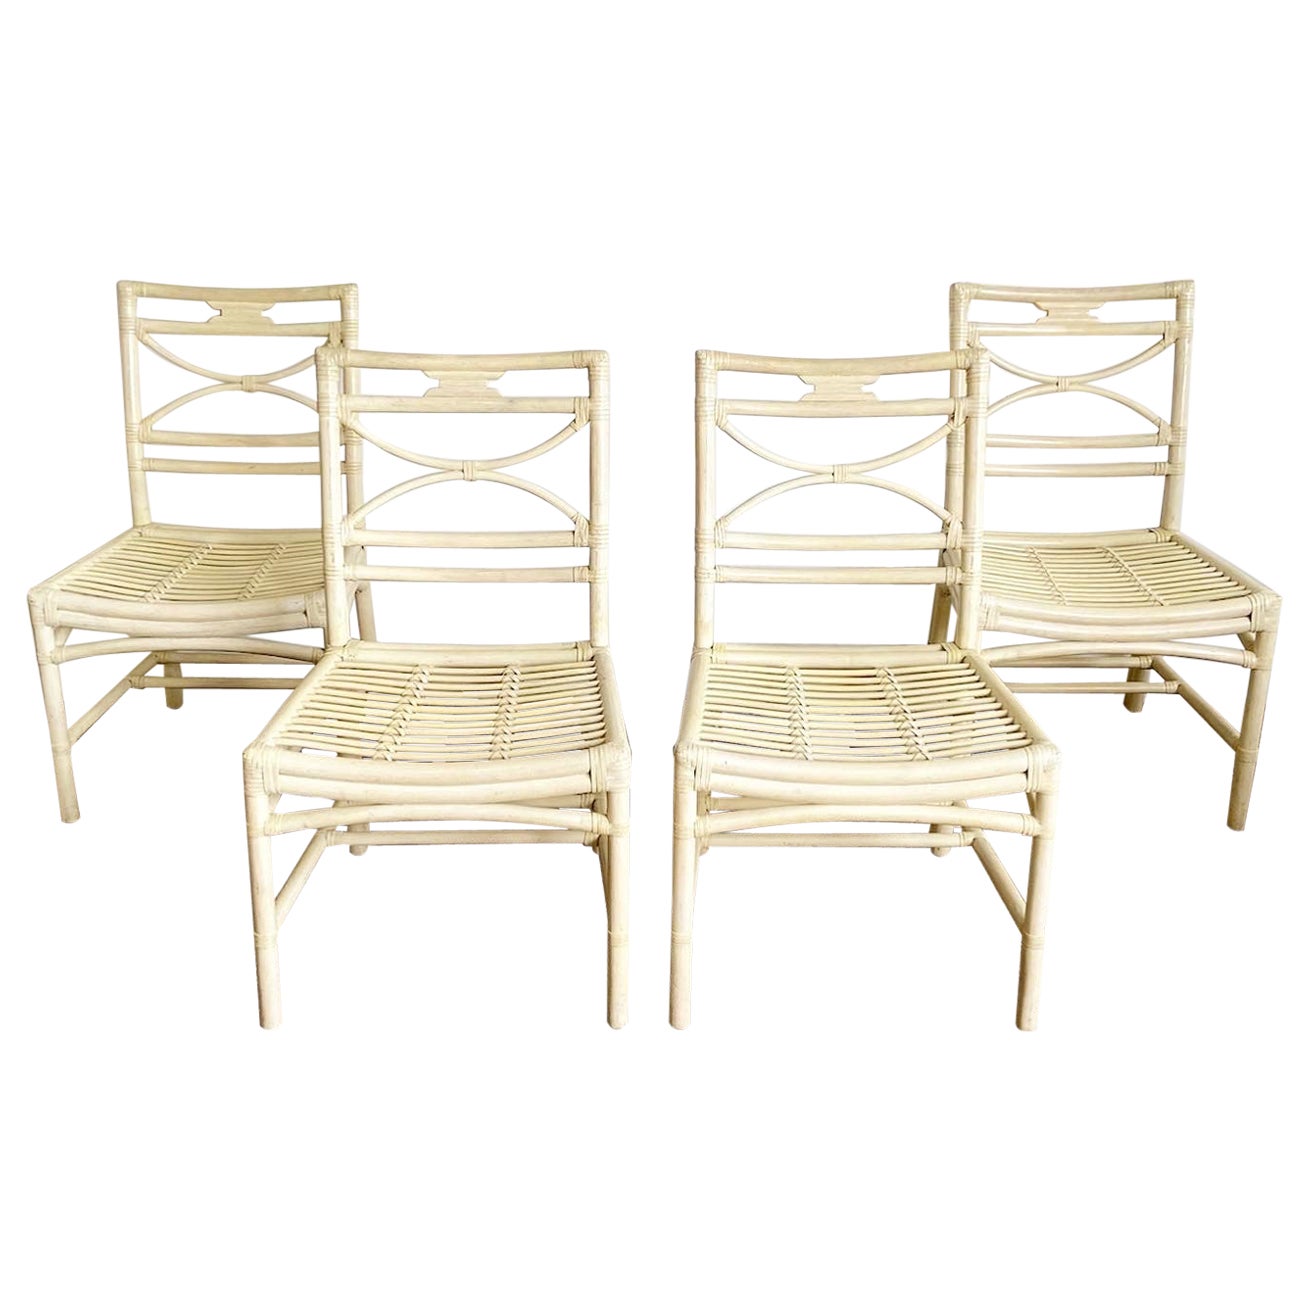 Boho Chic Cream Bamboo Rattan Dining Chairs For Sale